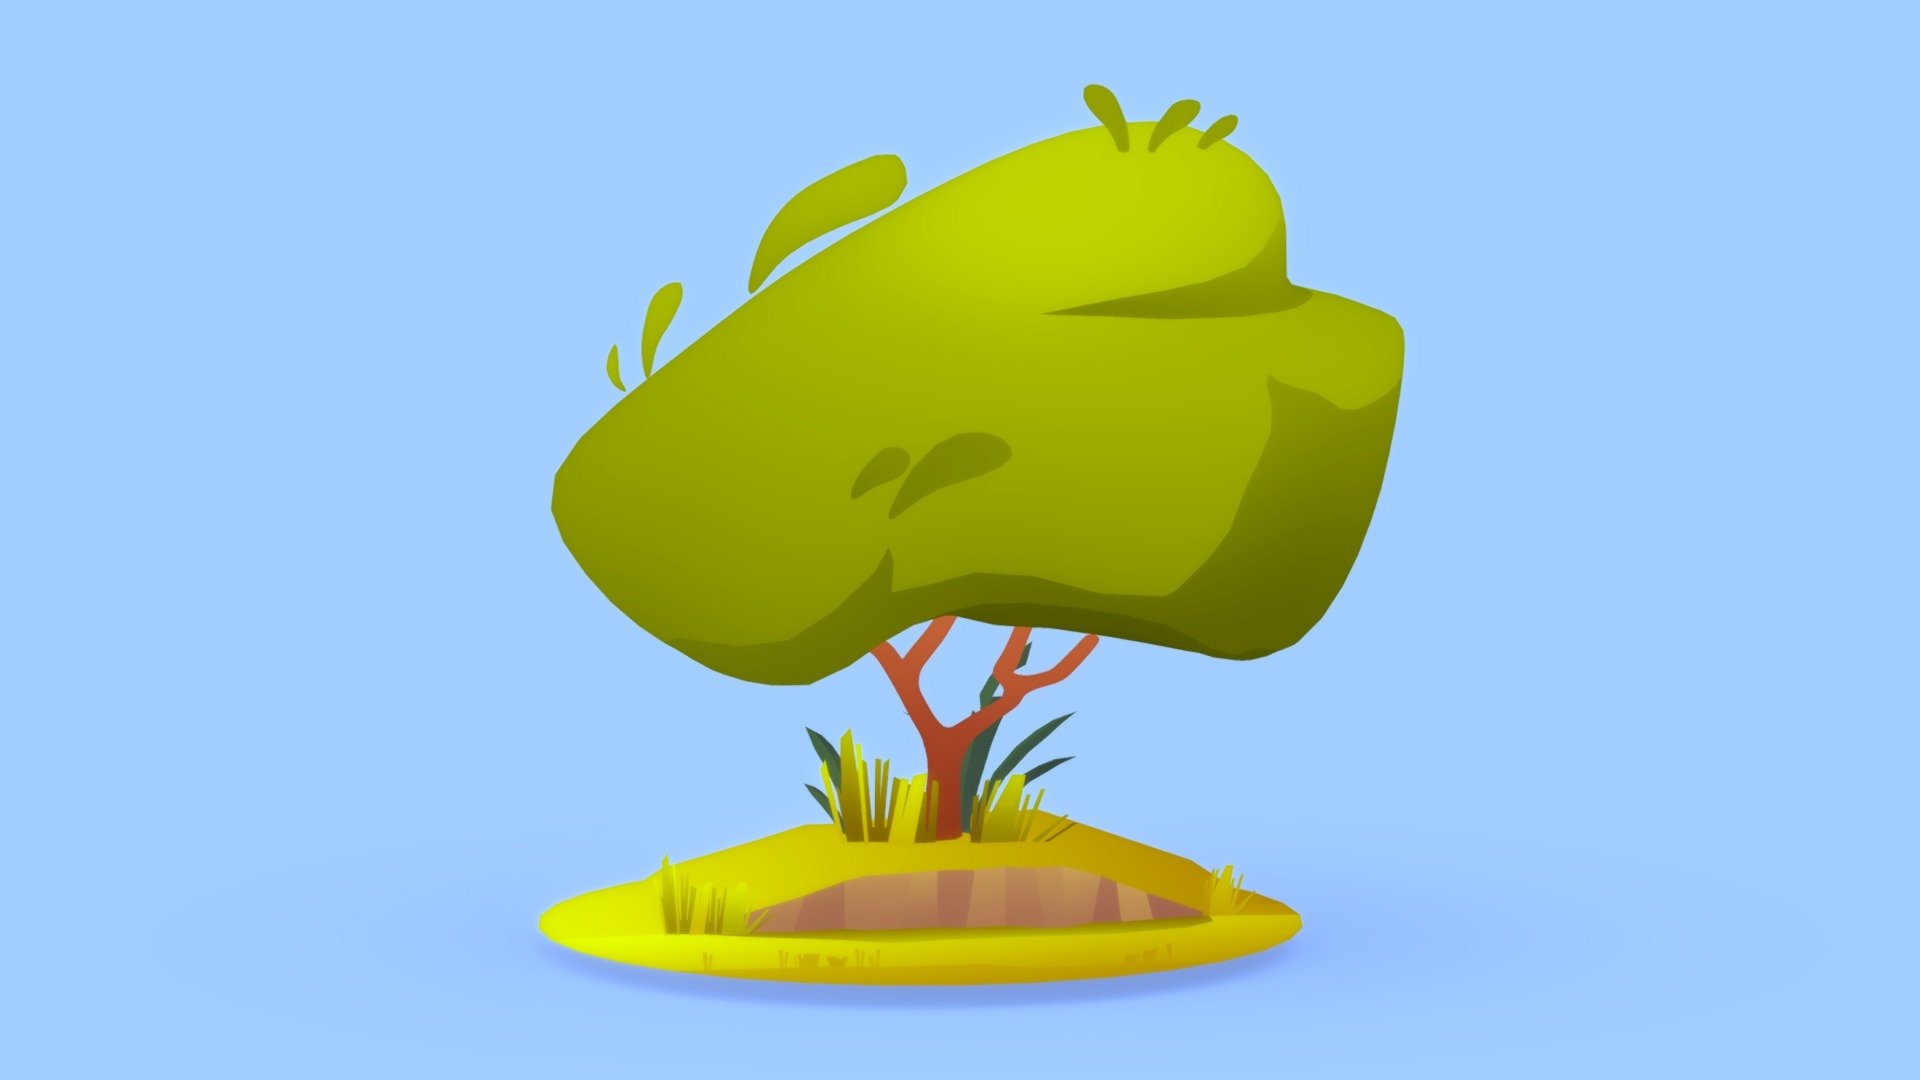 stylized unlit little bush.

Textured with gradient atlas, so it is performant for mobile games and video games.

Like a few of my other assets
in the same style, it uses a single texture diffuse map and is mapped using only color gradients. 
All gradient textures can be extended and combined to a large atlas.

There are more assets in this style to add to your game scene or environment. Check out my sale.

If you want to change the colors of the assets, you just need to move the UVs on the atlas to a different gradient.
Or contact me for changes, for a small fee.

I also accept freelance jobs. Do not hesitate to write me. 

*-------------Terms of Use--------------

Commercial use of the assets  provided is permitted but cannot be included in an asset pack or sold at any sort of asset/resource marketplace.* - Stylized Bush - Buy Royalty Free 3D model by Stylized Box (@Stylized_Box) 3d model